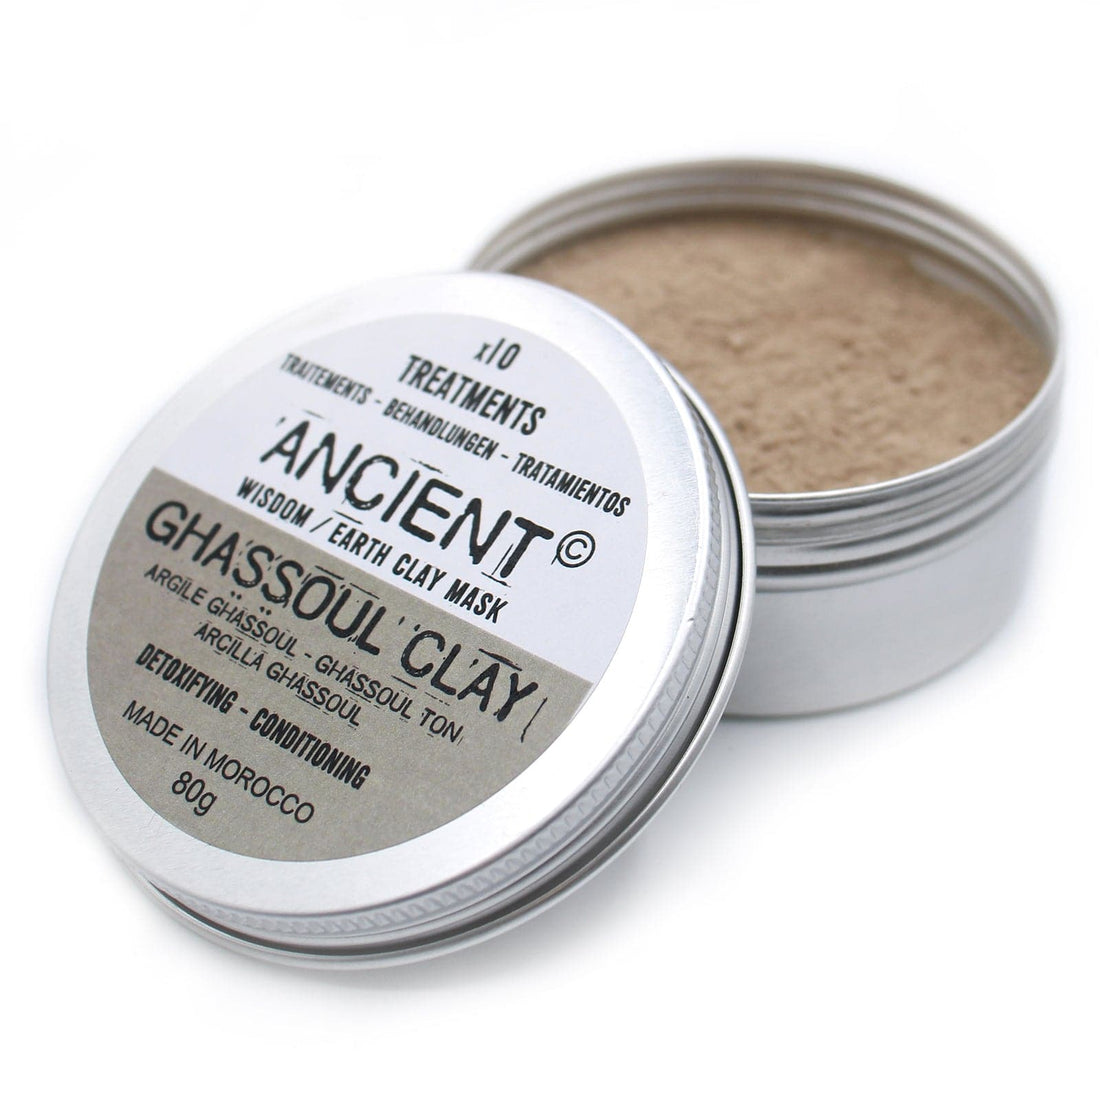 Ghassoul Clay 80g - best price from Maltashopper.com CLAY-06